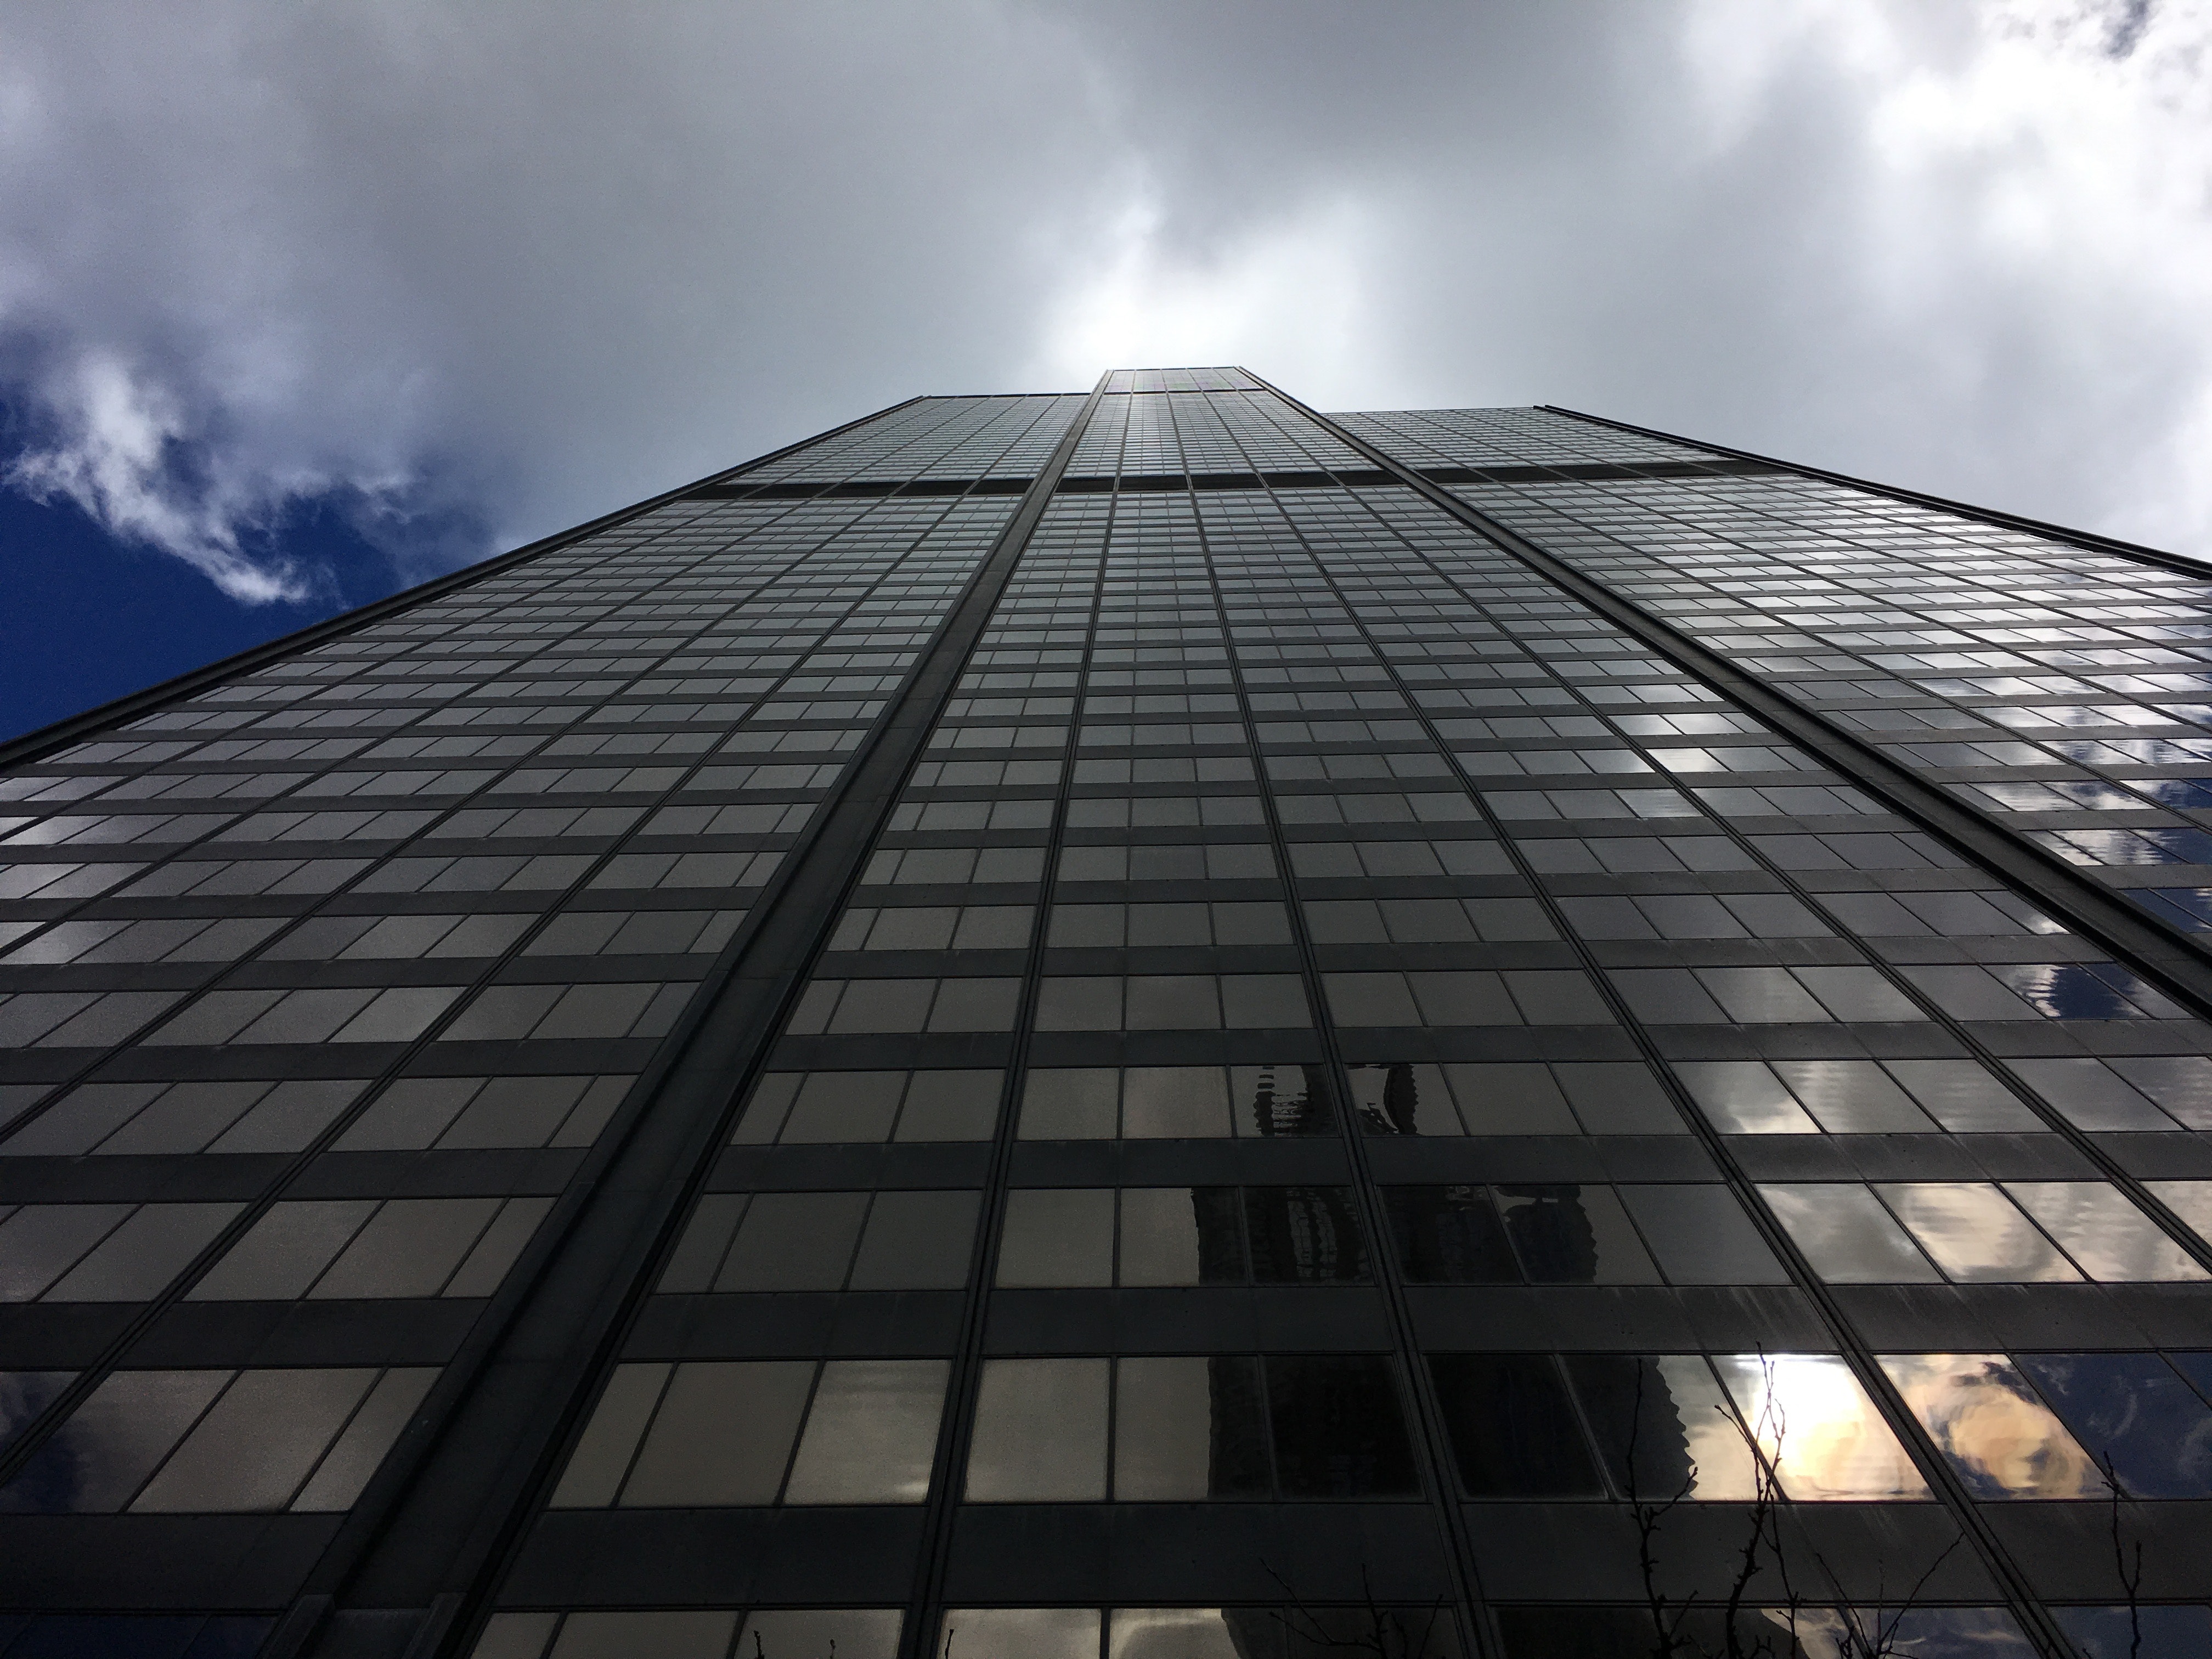 Low Angle Photography of High Rise Building at Daytime, Architecture, Building, City, Clouds, HQ Photo